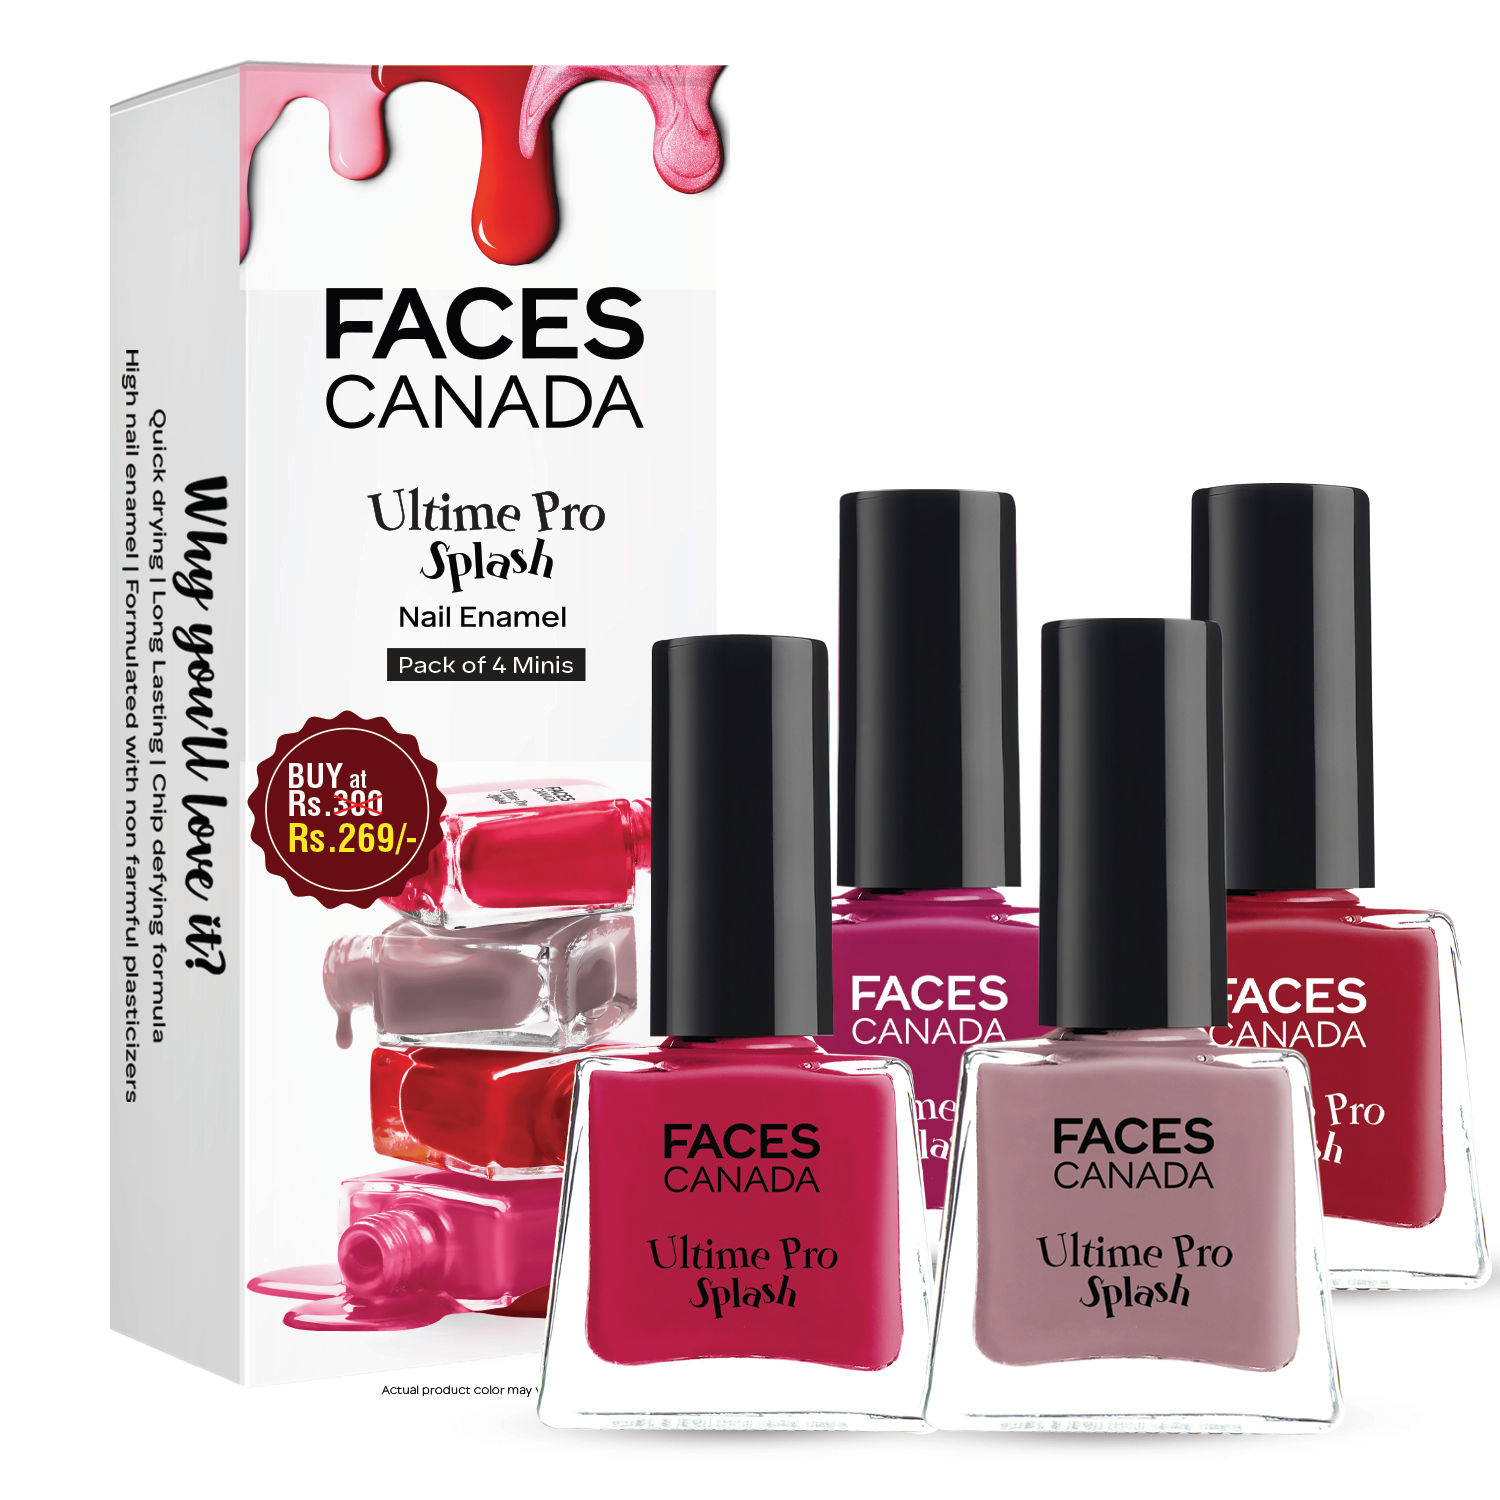 Faces Canada Splash Nail Polish Collection | Review & Swatches